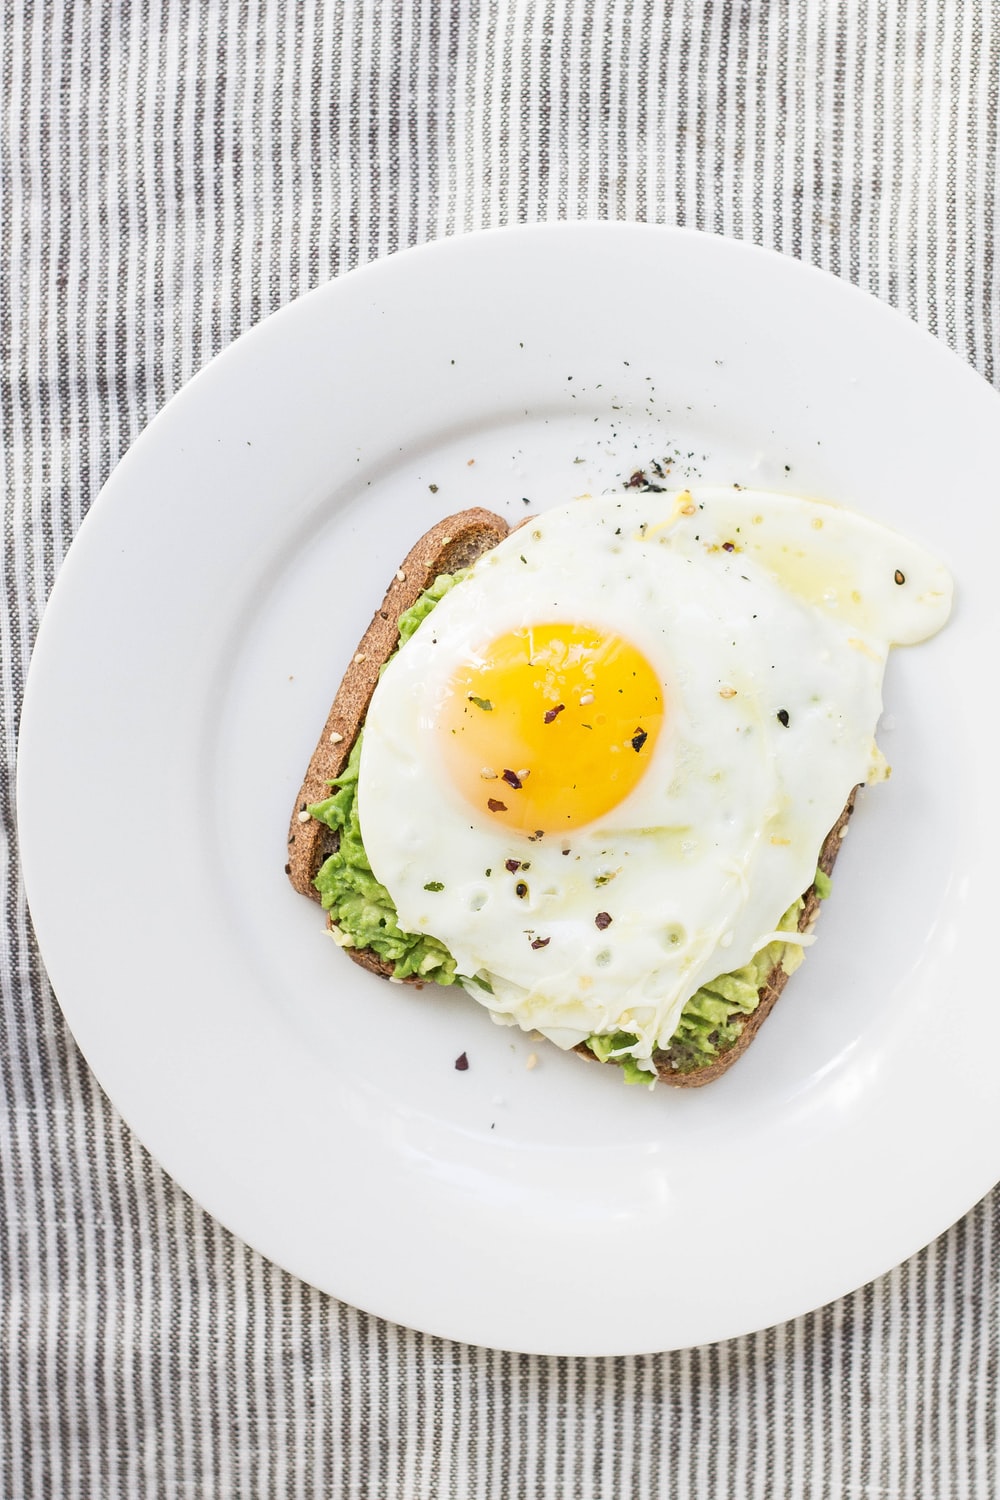 Fried Eggs Picture. Download Free Image